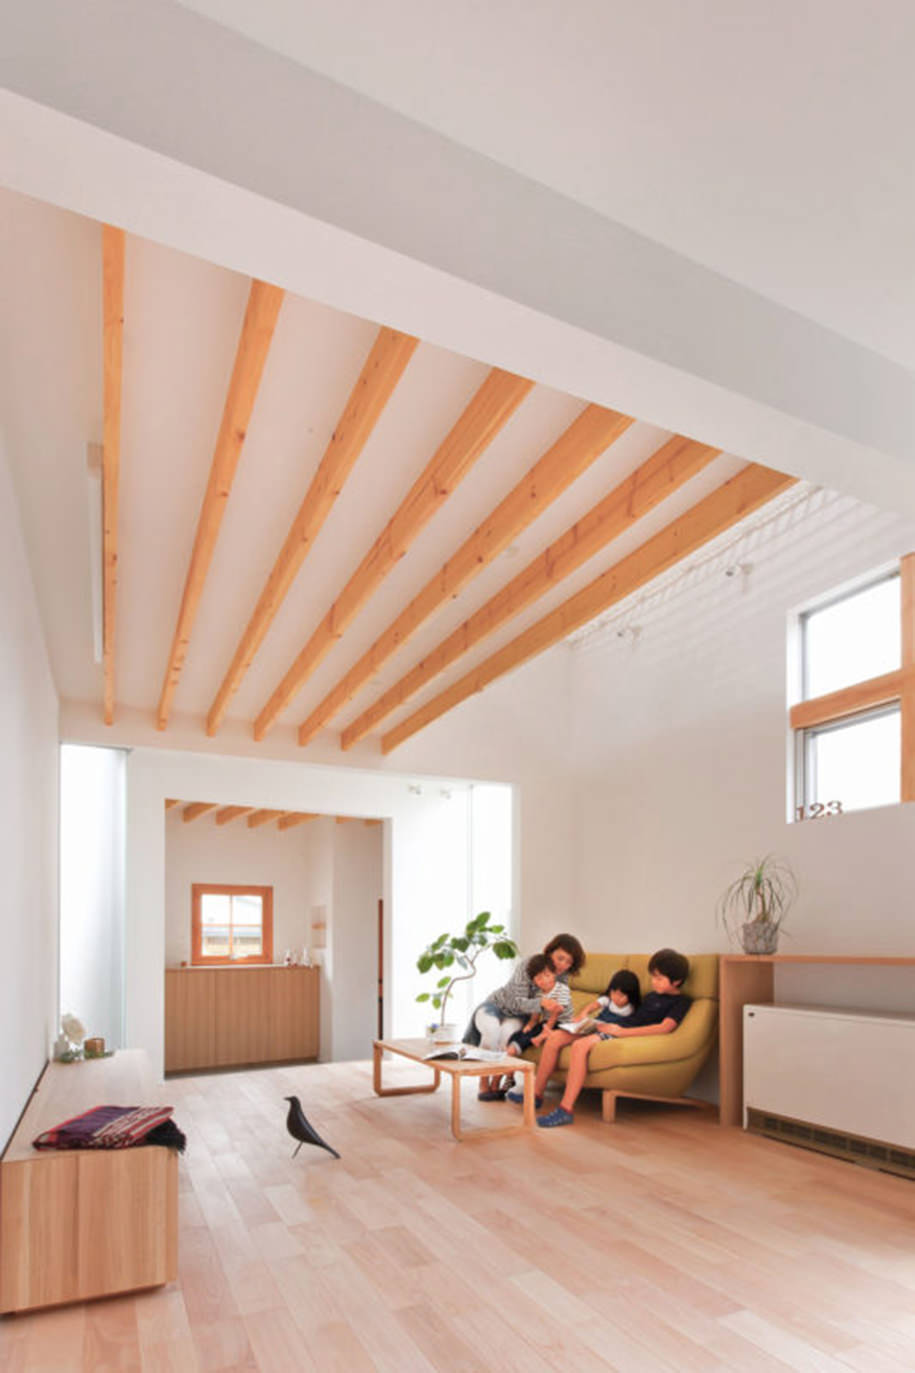 Archisearch Yamashina House in Kyoto, Japan / Alts Design Office